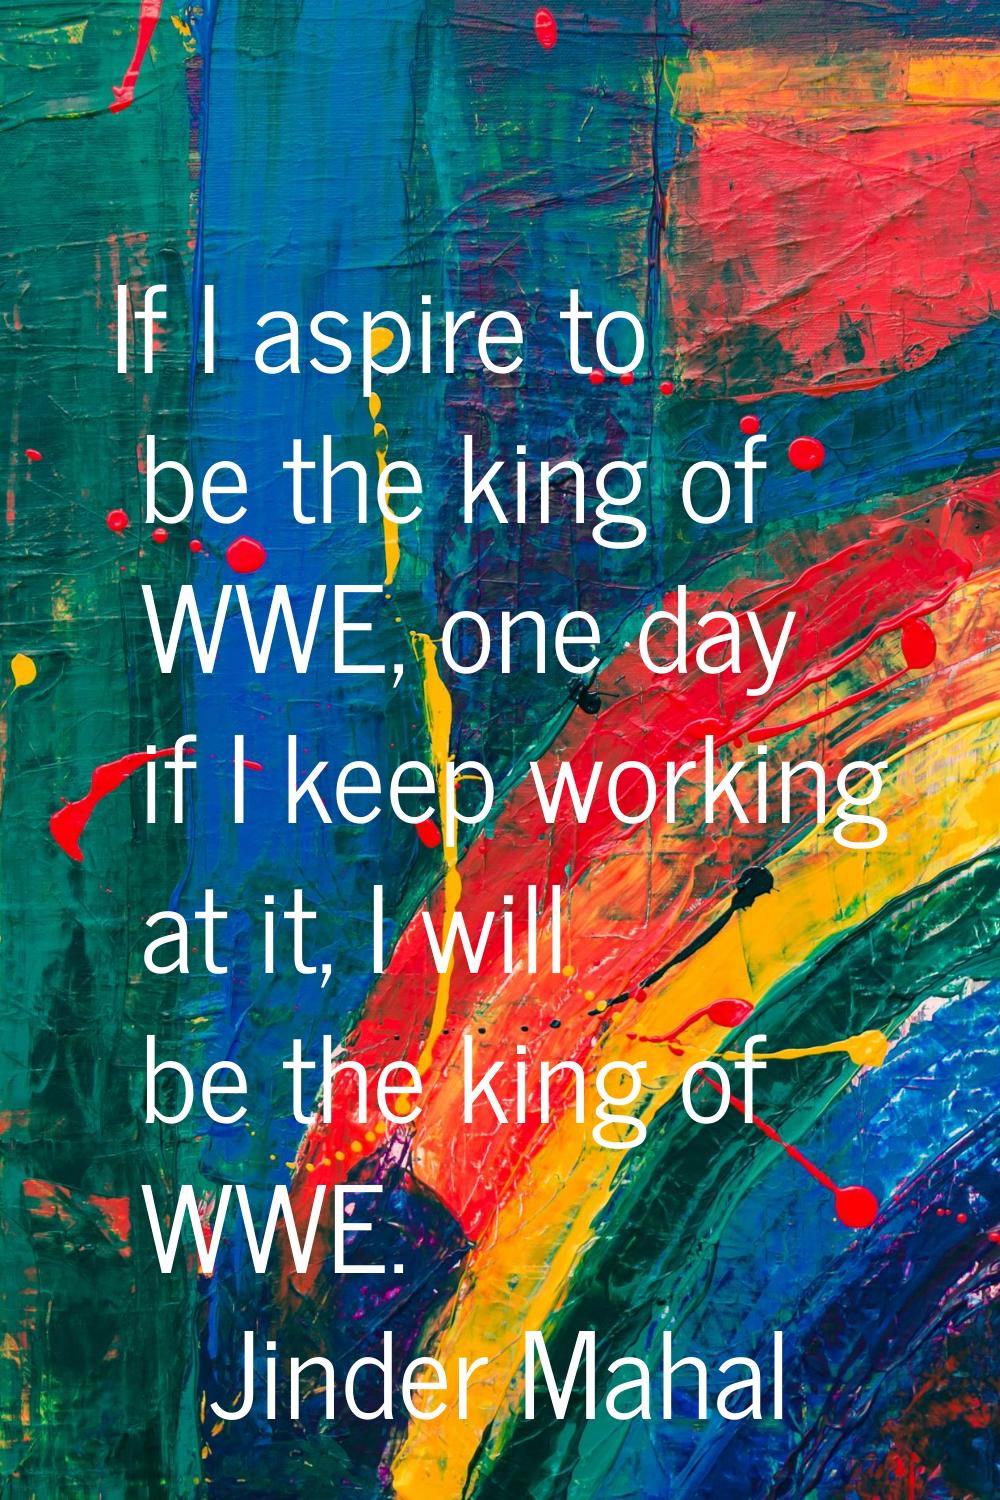 If I aspire to be the king of WWE, one day if I keep working at it, I will be the king of WWE.